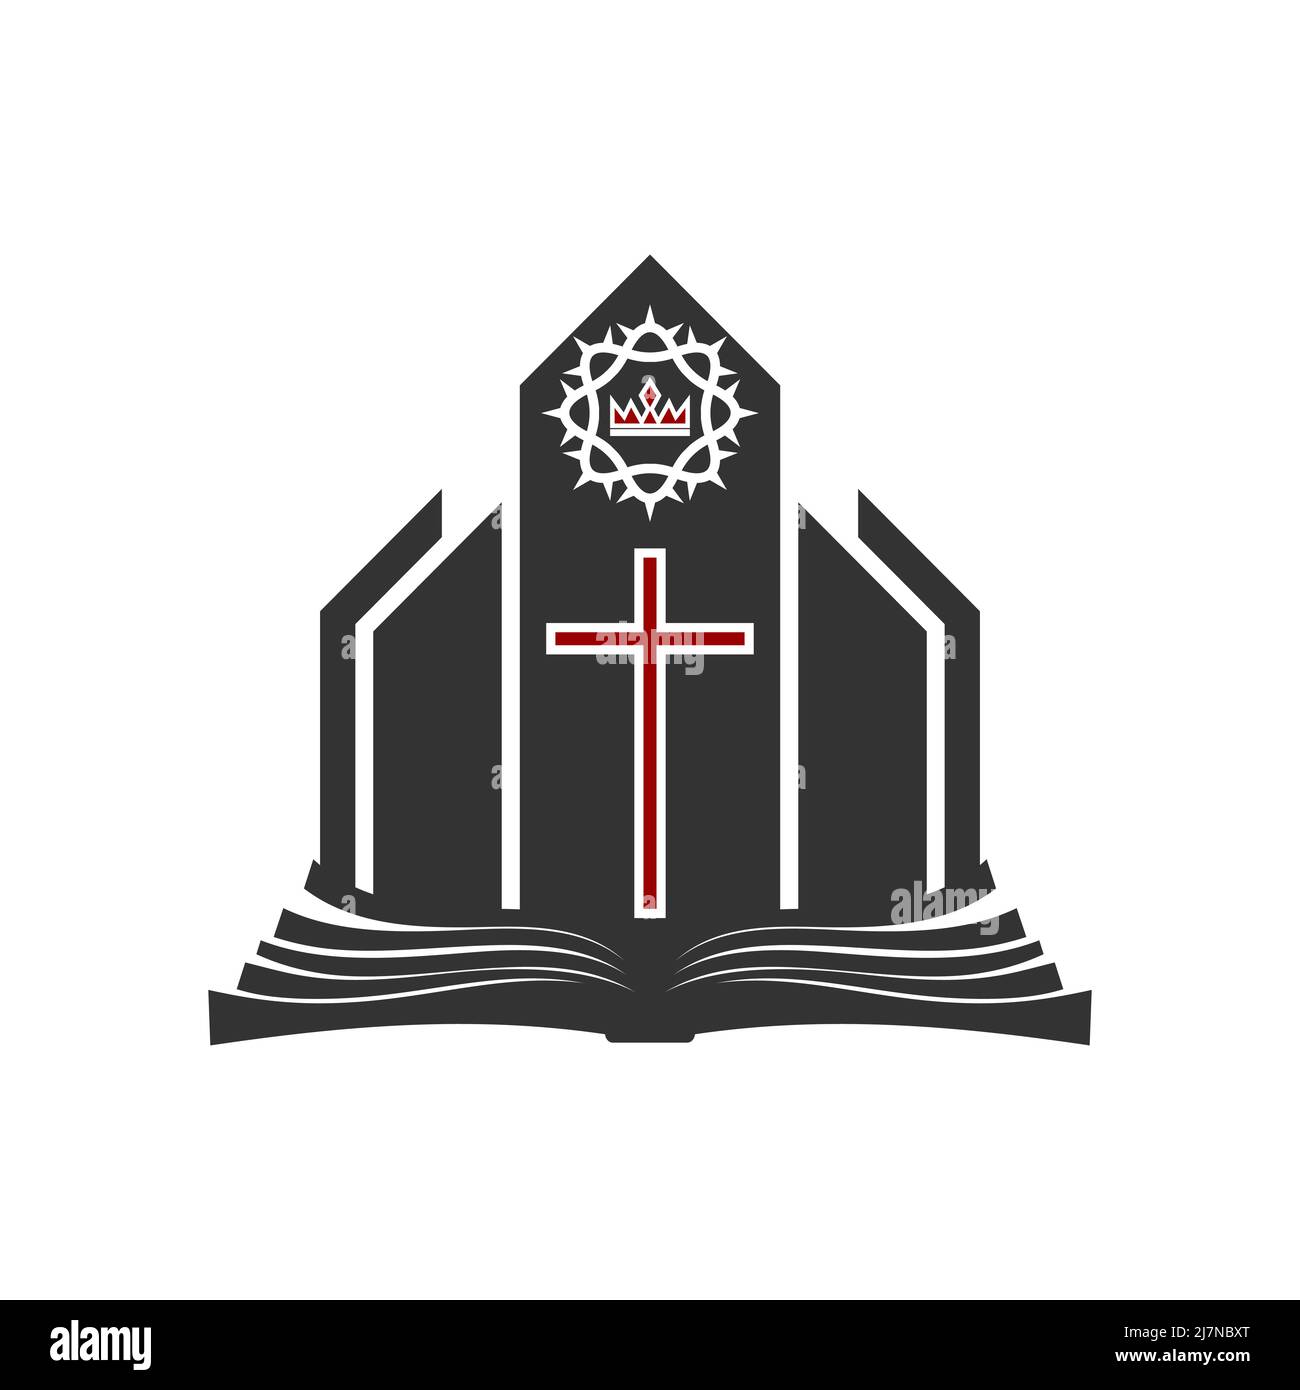 Christian illustration. Church logo. The cross of the Lord Jesus Christ against the background of the building, a crown of thorns on top, an open bibl Stock Vector